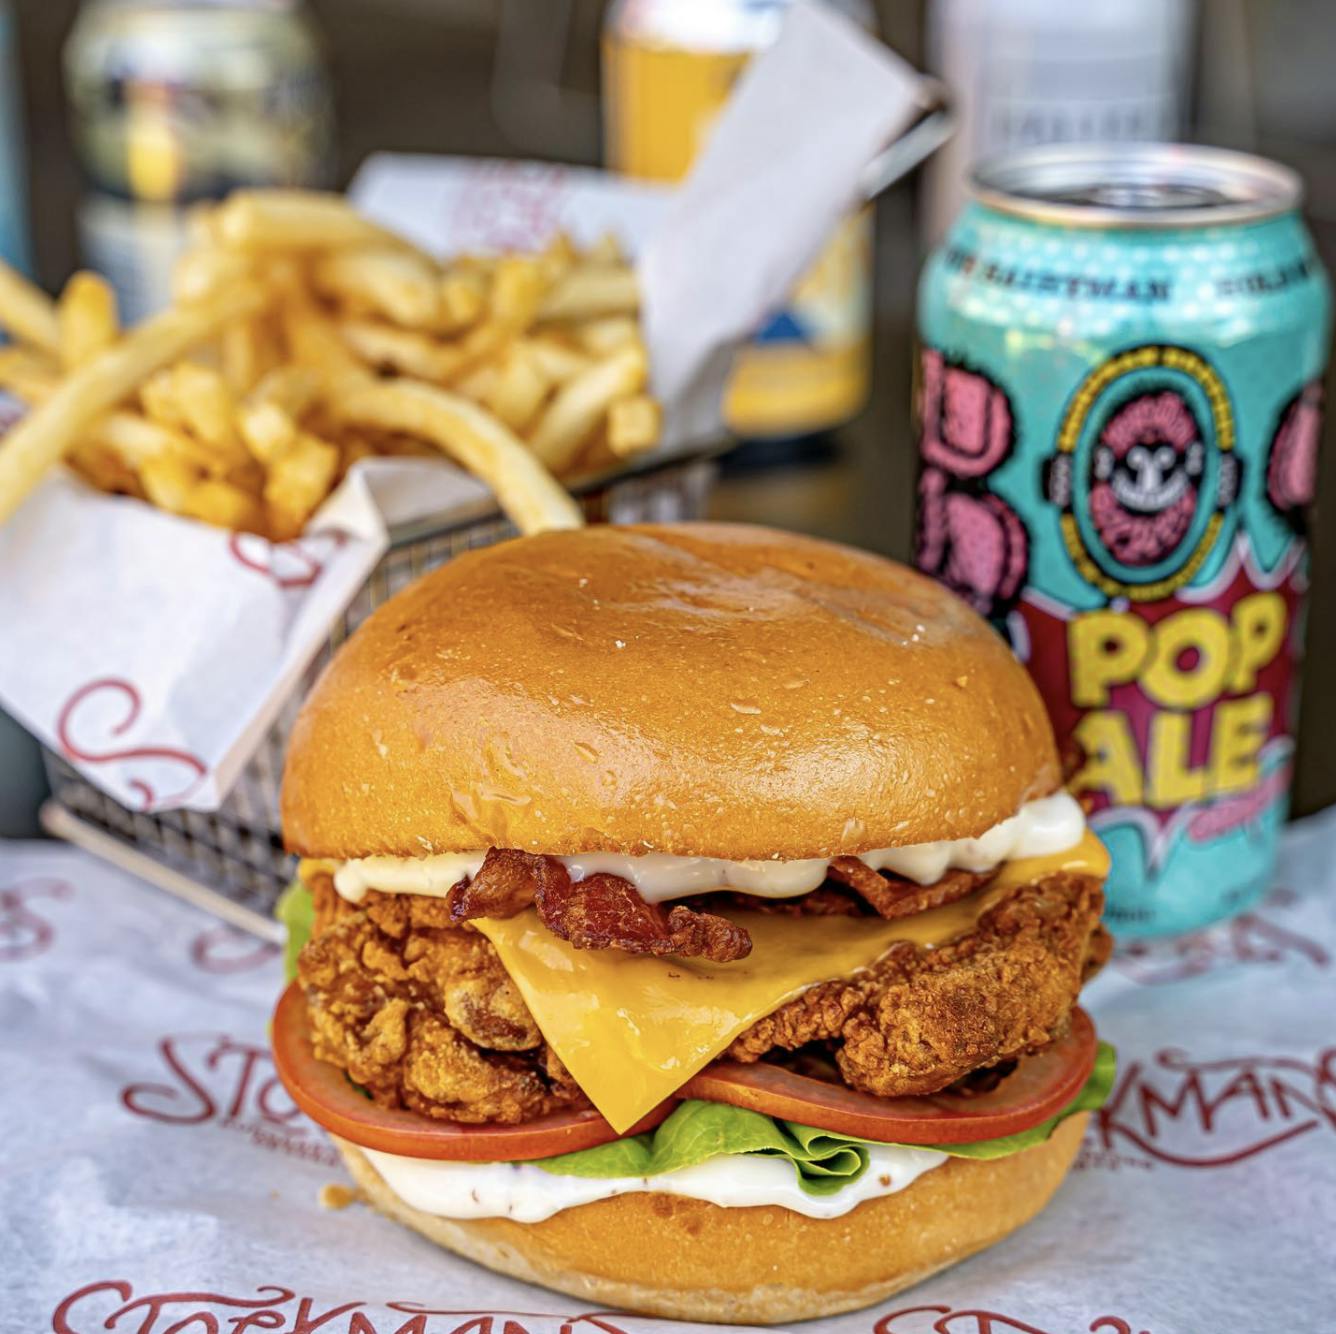 Image of a fried chicken burger with a can of craft beer and French fries in the background